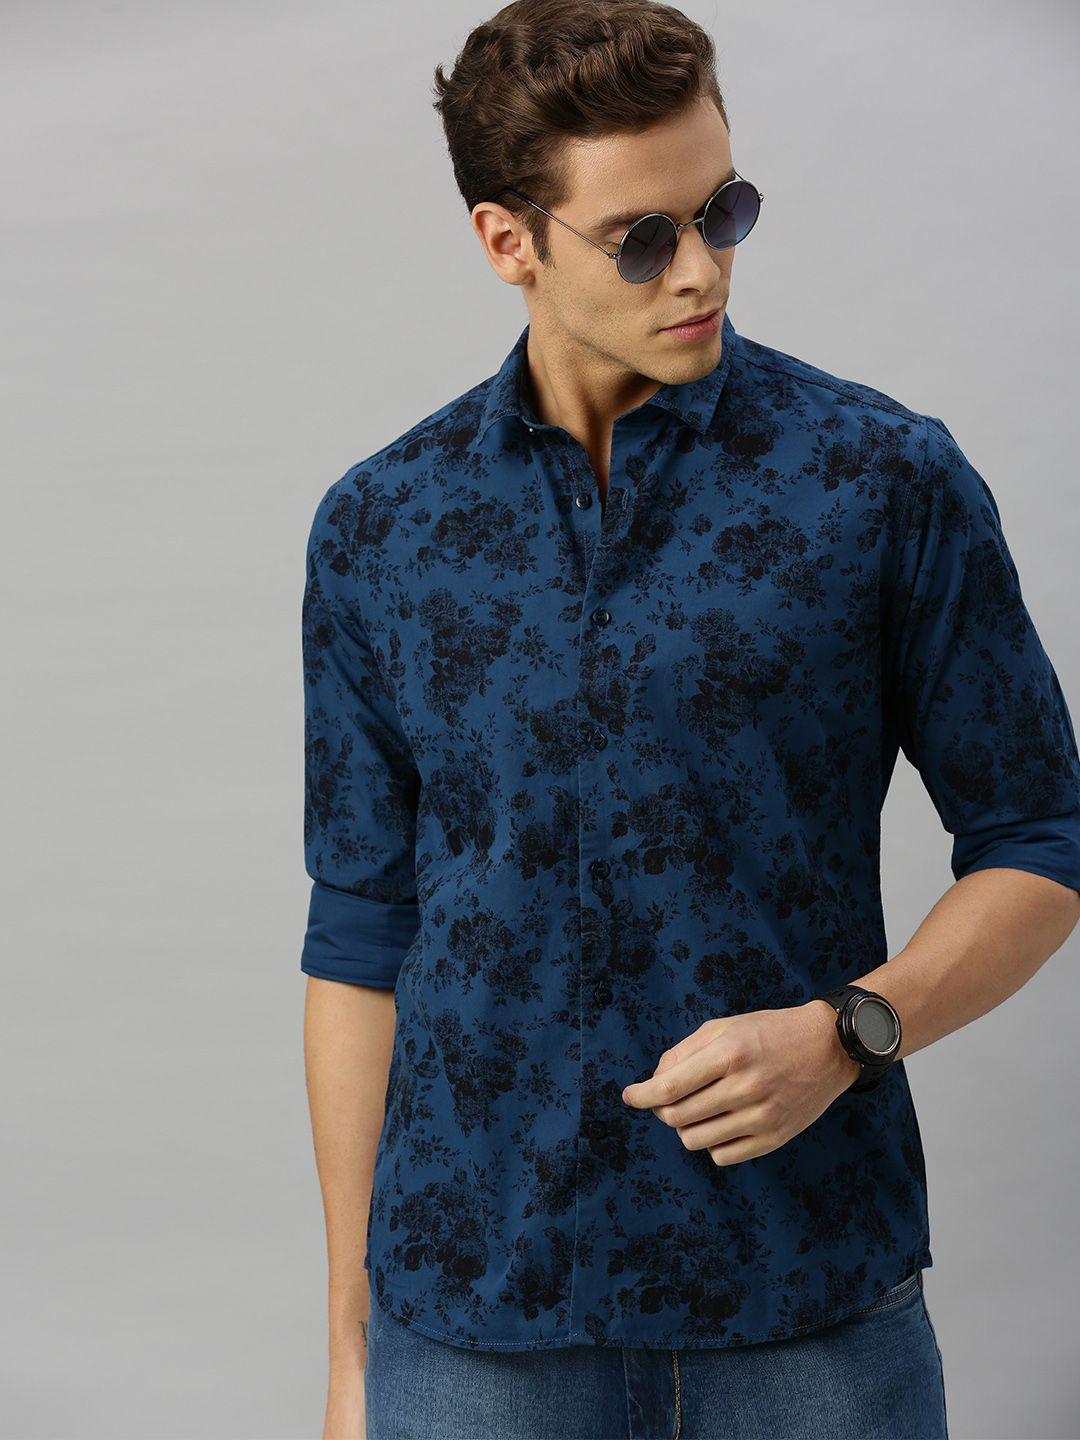 mast & harbour men navy blue and black floral printed pure cotton casual shirt